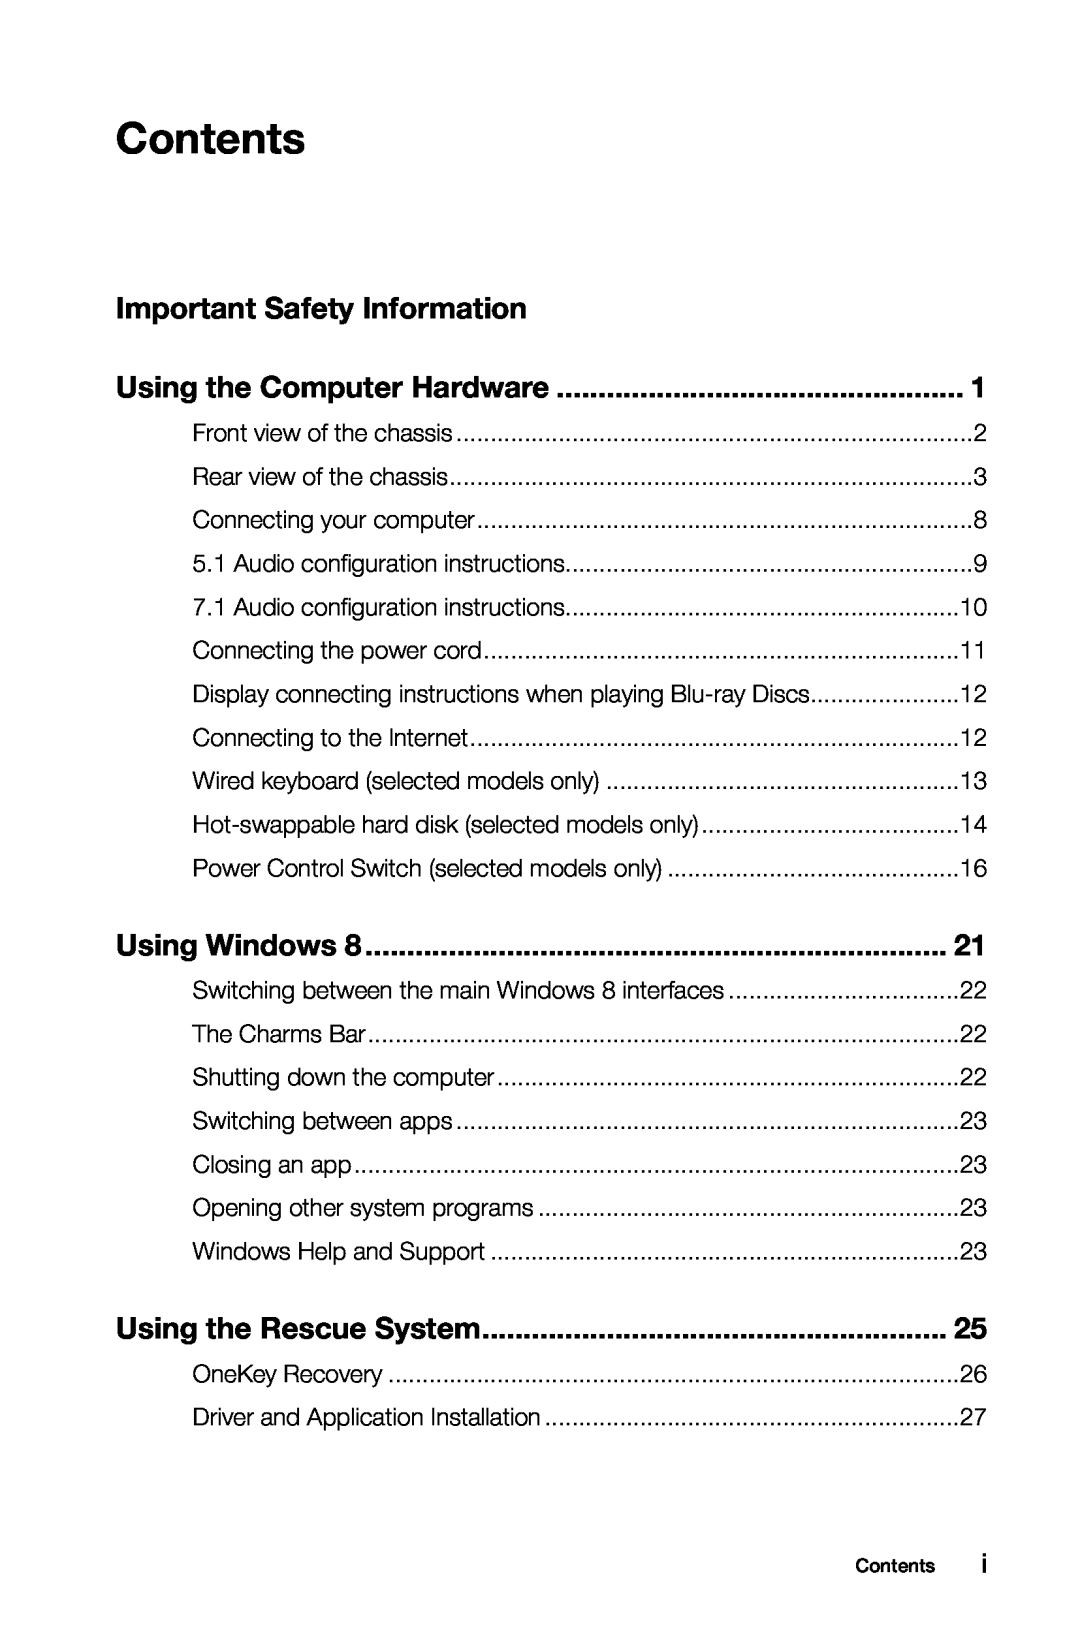 Lenovo 10090/2556/4748 [K415] manual Contents, Important Safety Information, Using Windows, Using the Rescue System 